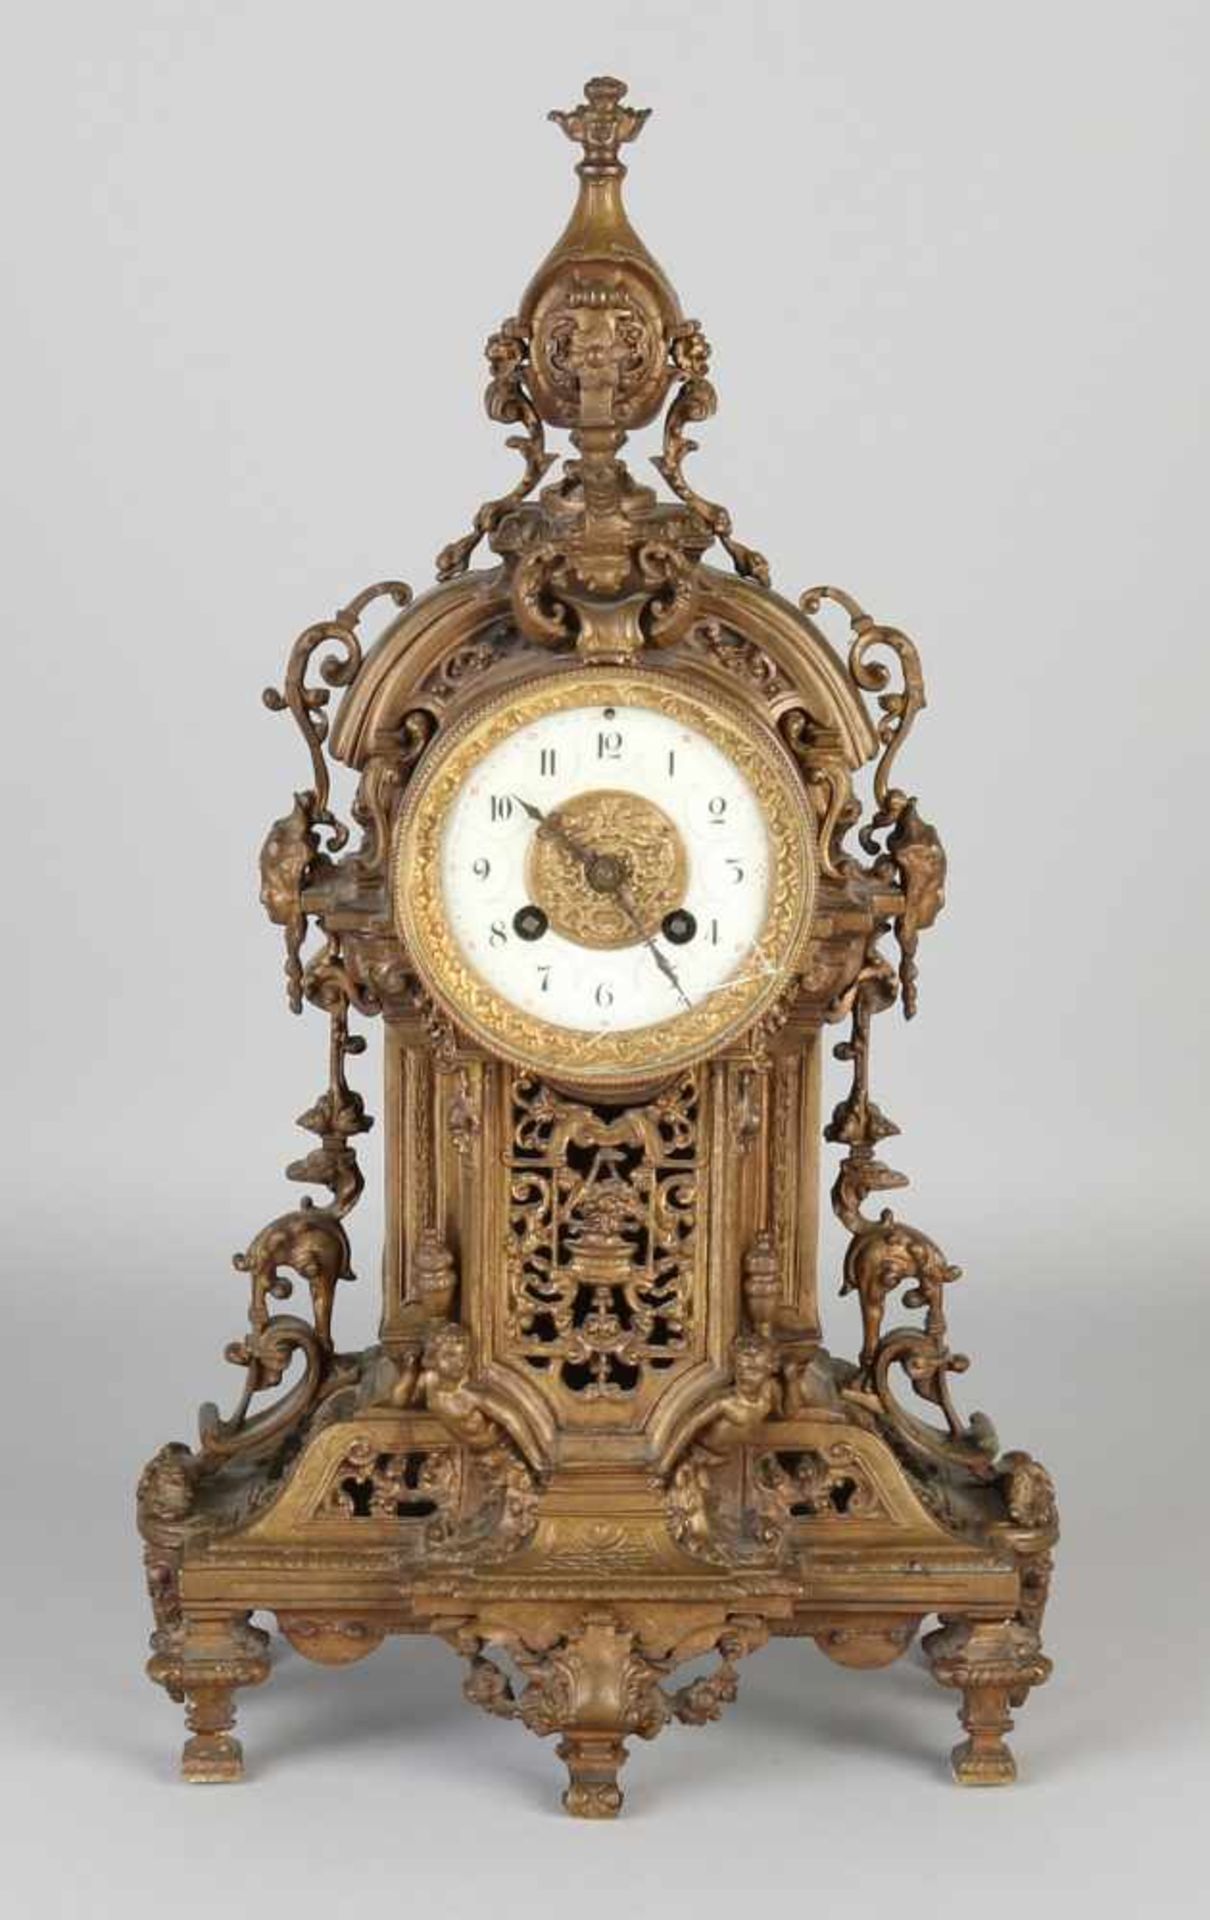 Antique French Neo Renaissance bronze mantel clock with vines and caryatids. Circa 1880. Eight day-